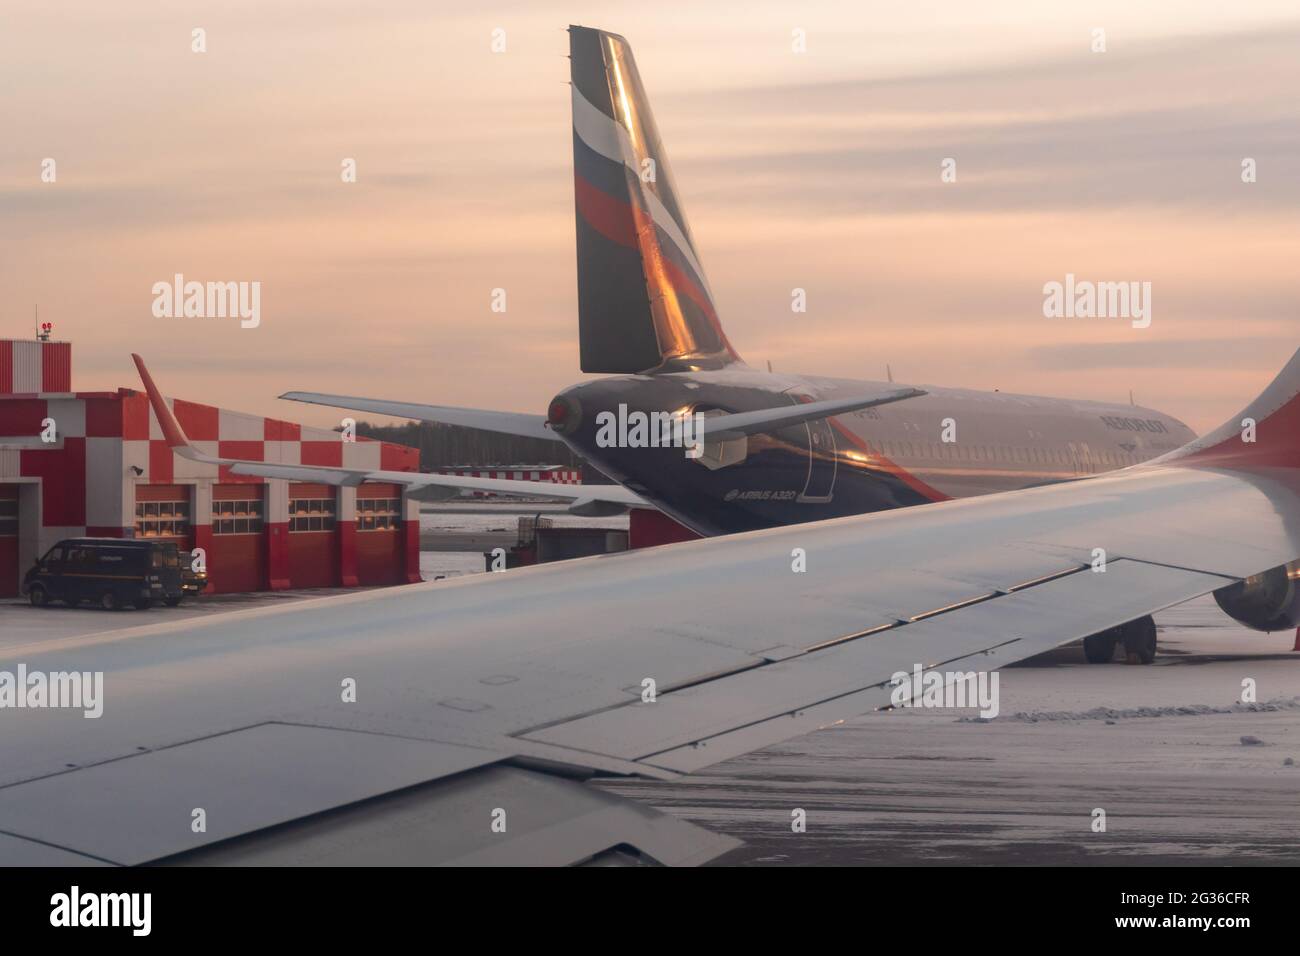 Yekaterinburg. Russia. 12/20/2020. View from the airplane window of the runway and control tower during takeoff at dawn. Ural Airlines. Aeroflot Stock Photo